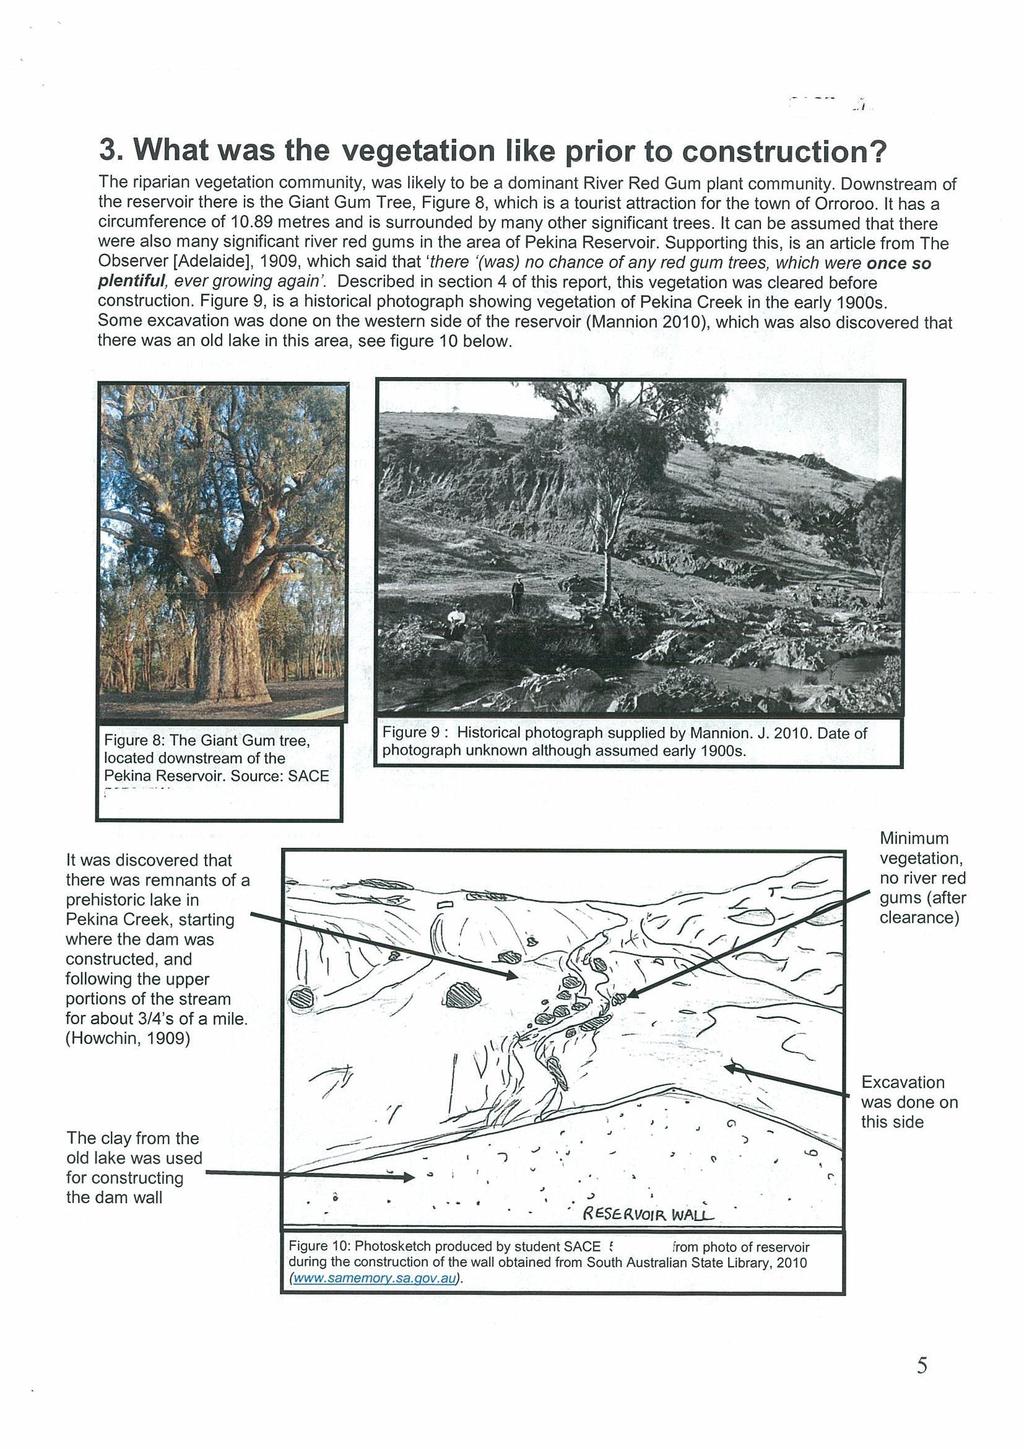 Image removed due to copyright. Figure 8: The Giant Gum tree, located downstream of the Pekina Reservoir.